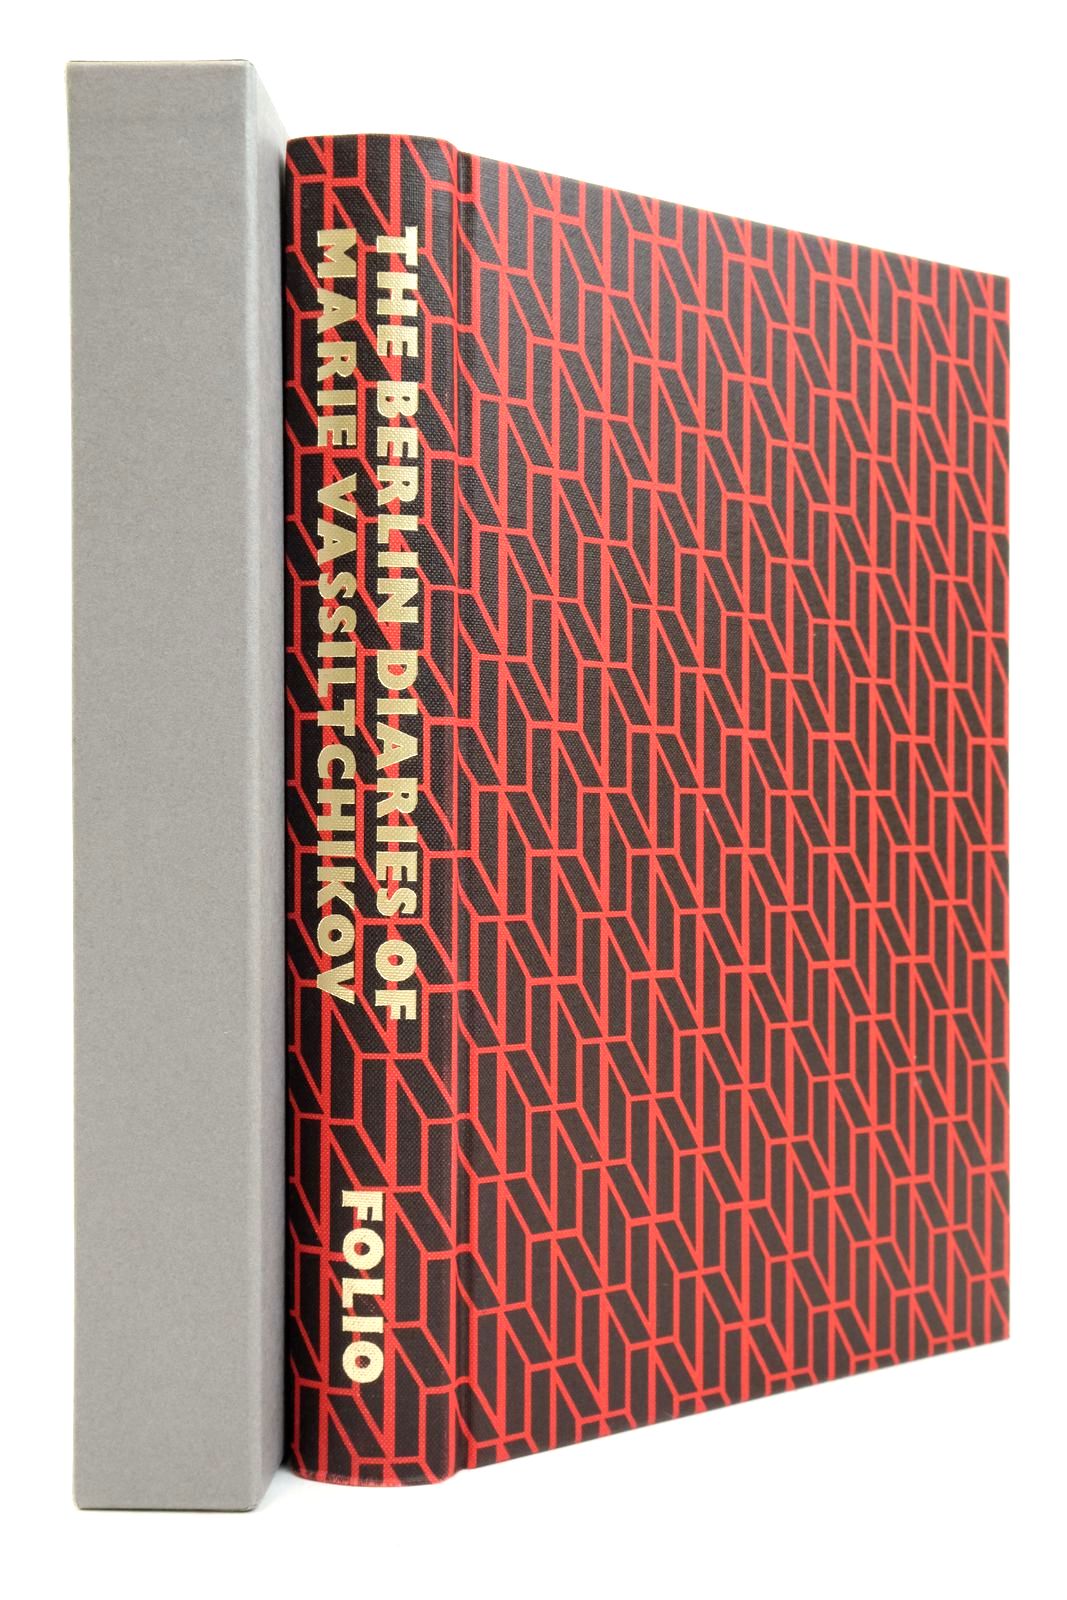 Photo of THE BERLIN DIARIES 1940-1945 written by Vassiltchikov, Marie Vassiltchikov, George published by Folio Society (STOCK CODE: 2138343)  for sale by Stella & Rose's Books